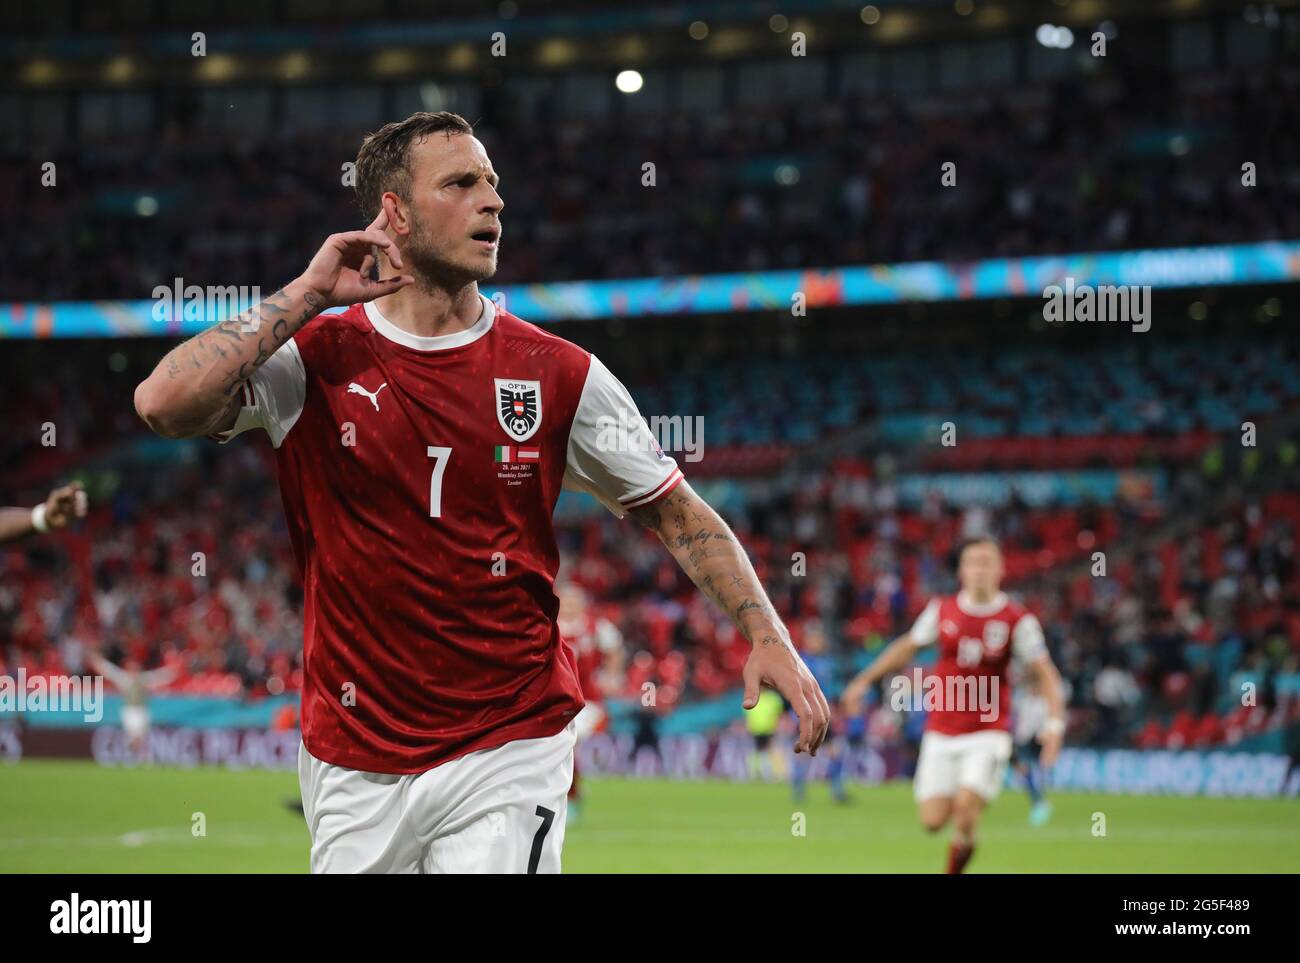 London, UK. 26th June, 2021. Marco Arnautovic (A) celebrates but his goal was ruled offside at the Italy v Austria UEFA EURO 2020 Group C match at Wembley Stadium, London, UK, on June 26, 2020. Credit: Paul Marriott/Alamy Live News Stock Photo